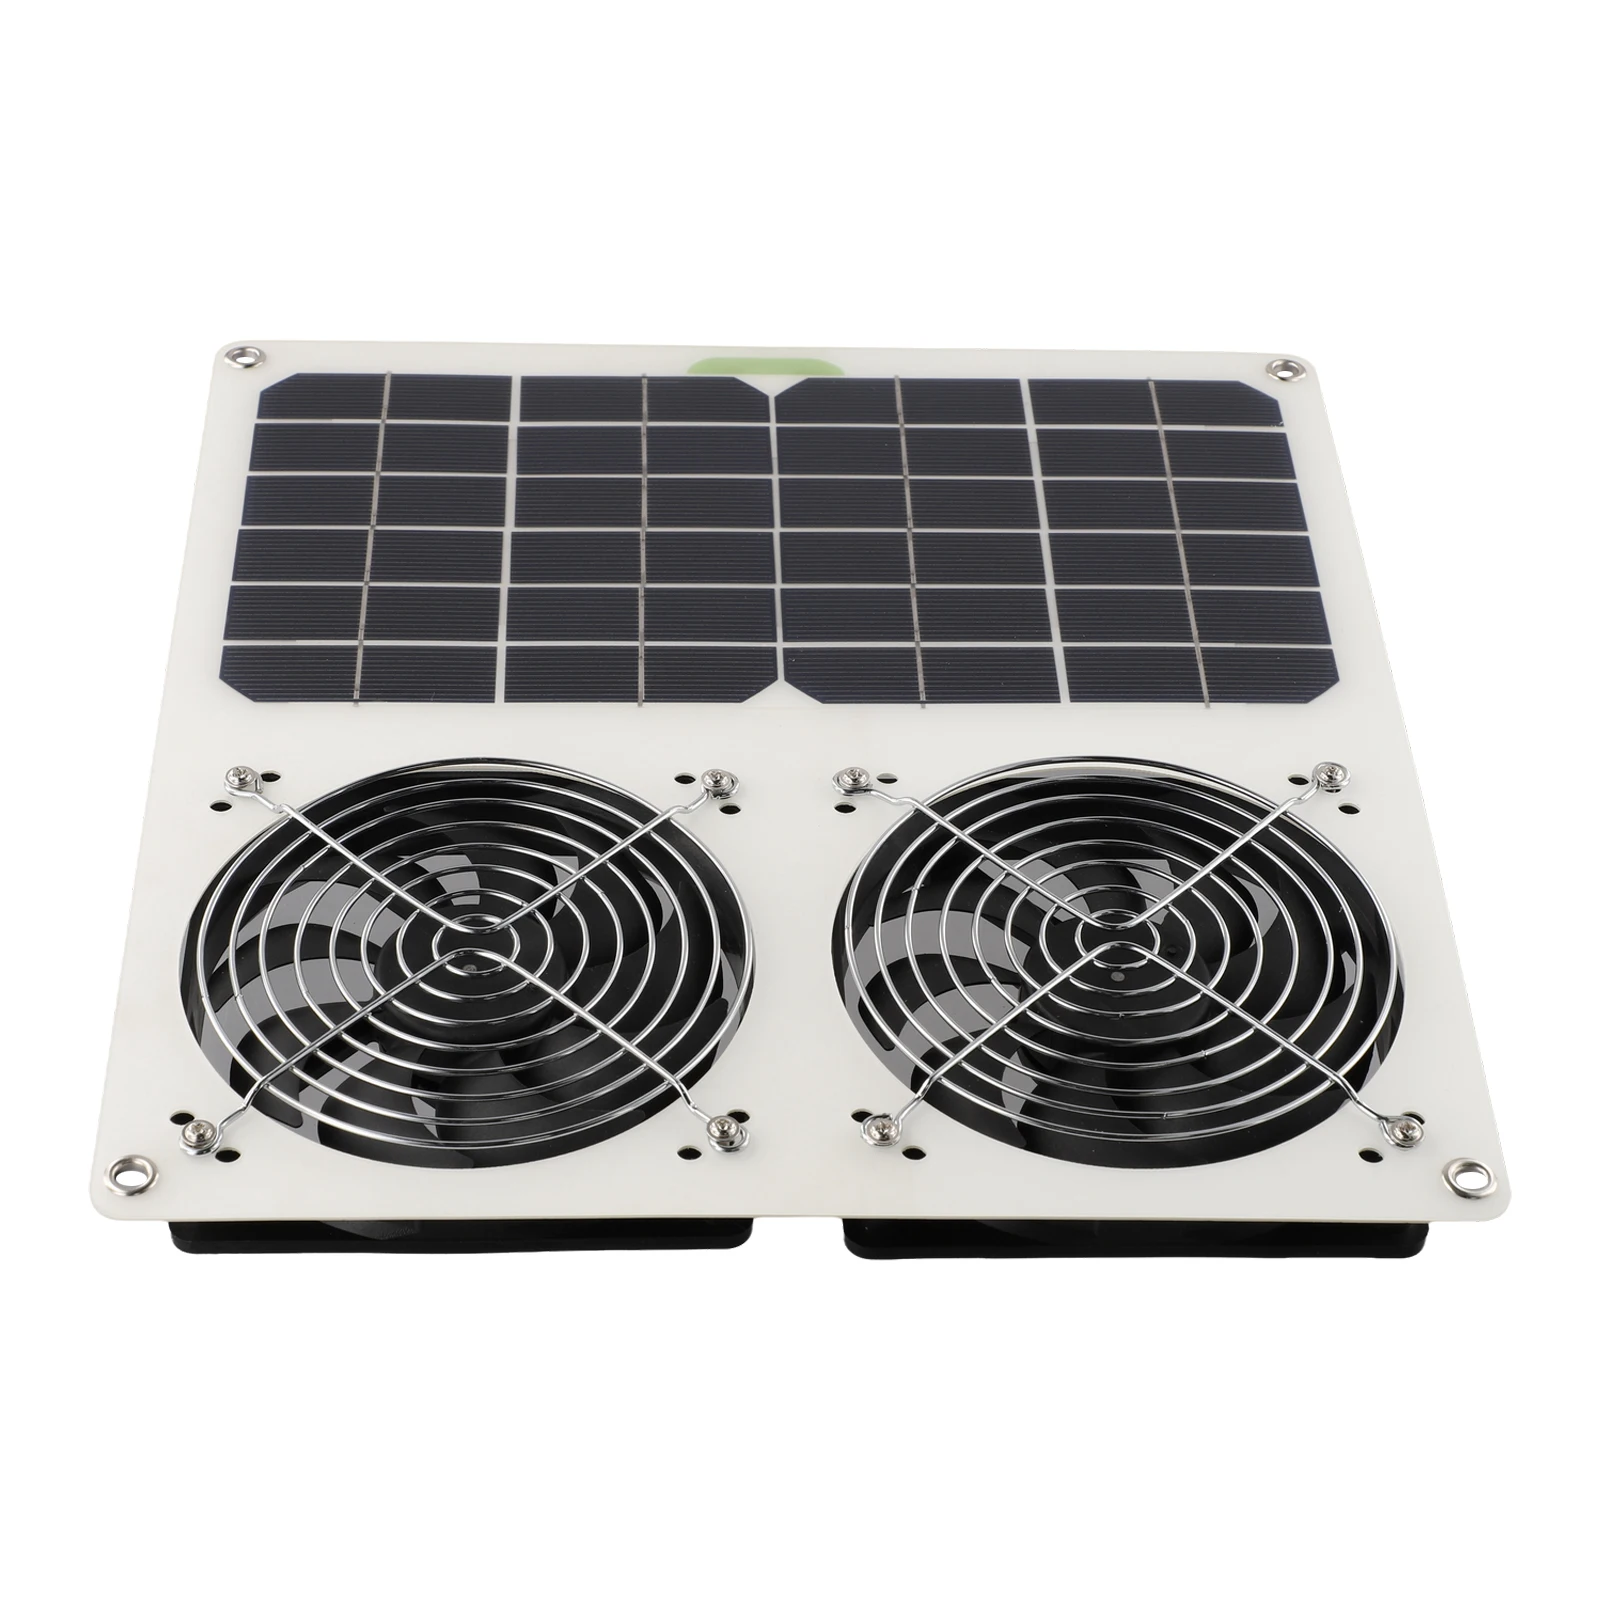 

Dual Blade Solar Panel Ventilation Fan Perfect for Basements Chicken Coops Sidewalks Strong and Silent Performance